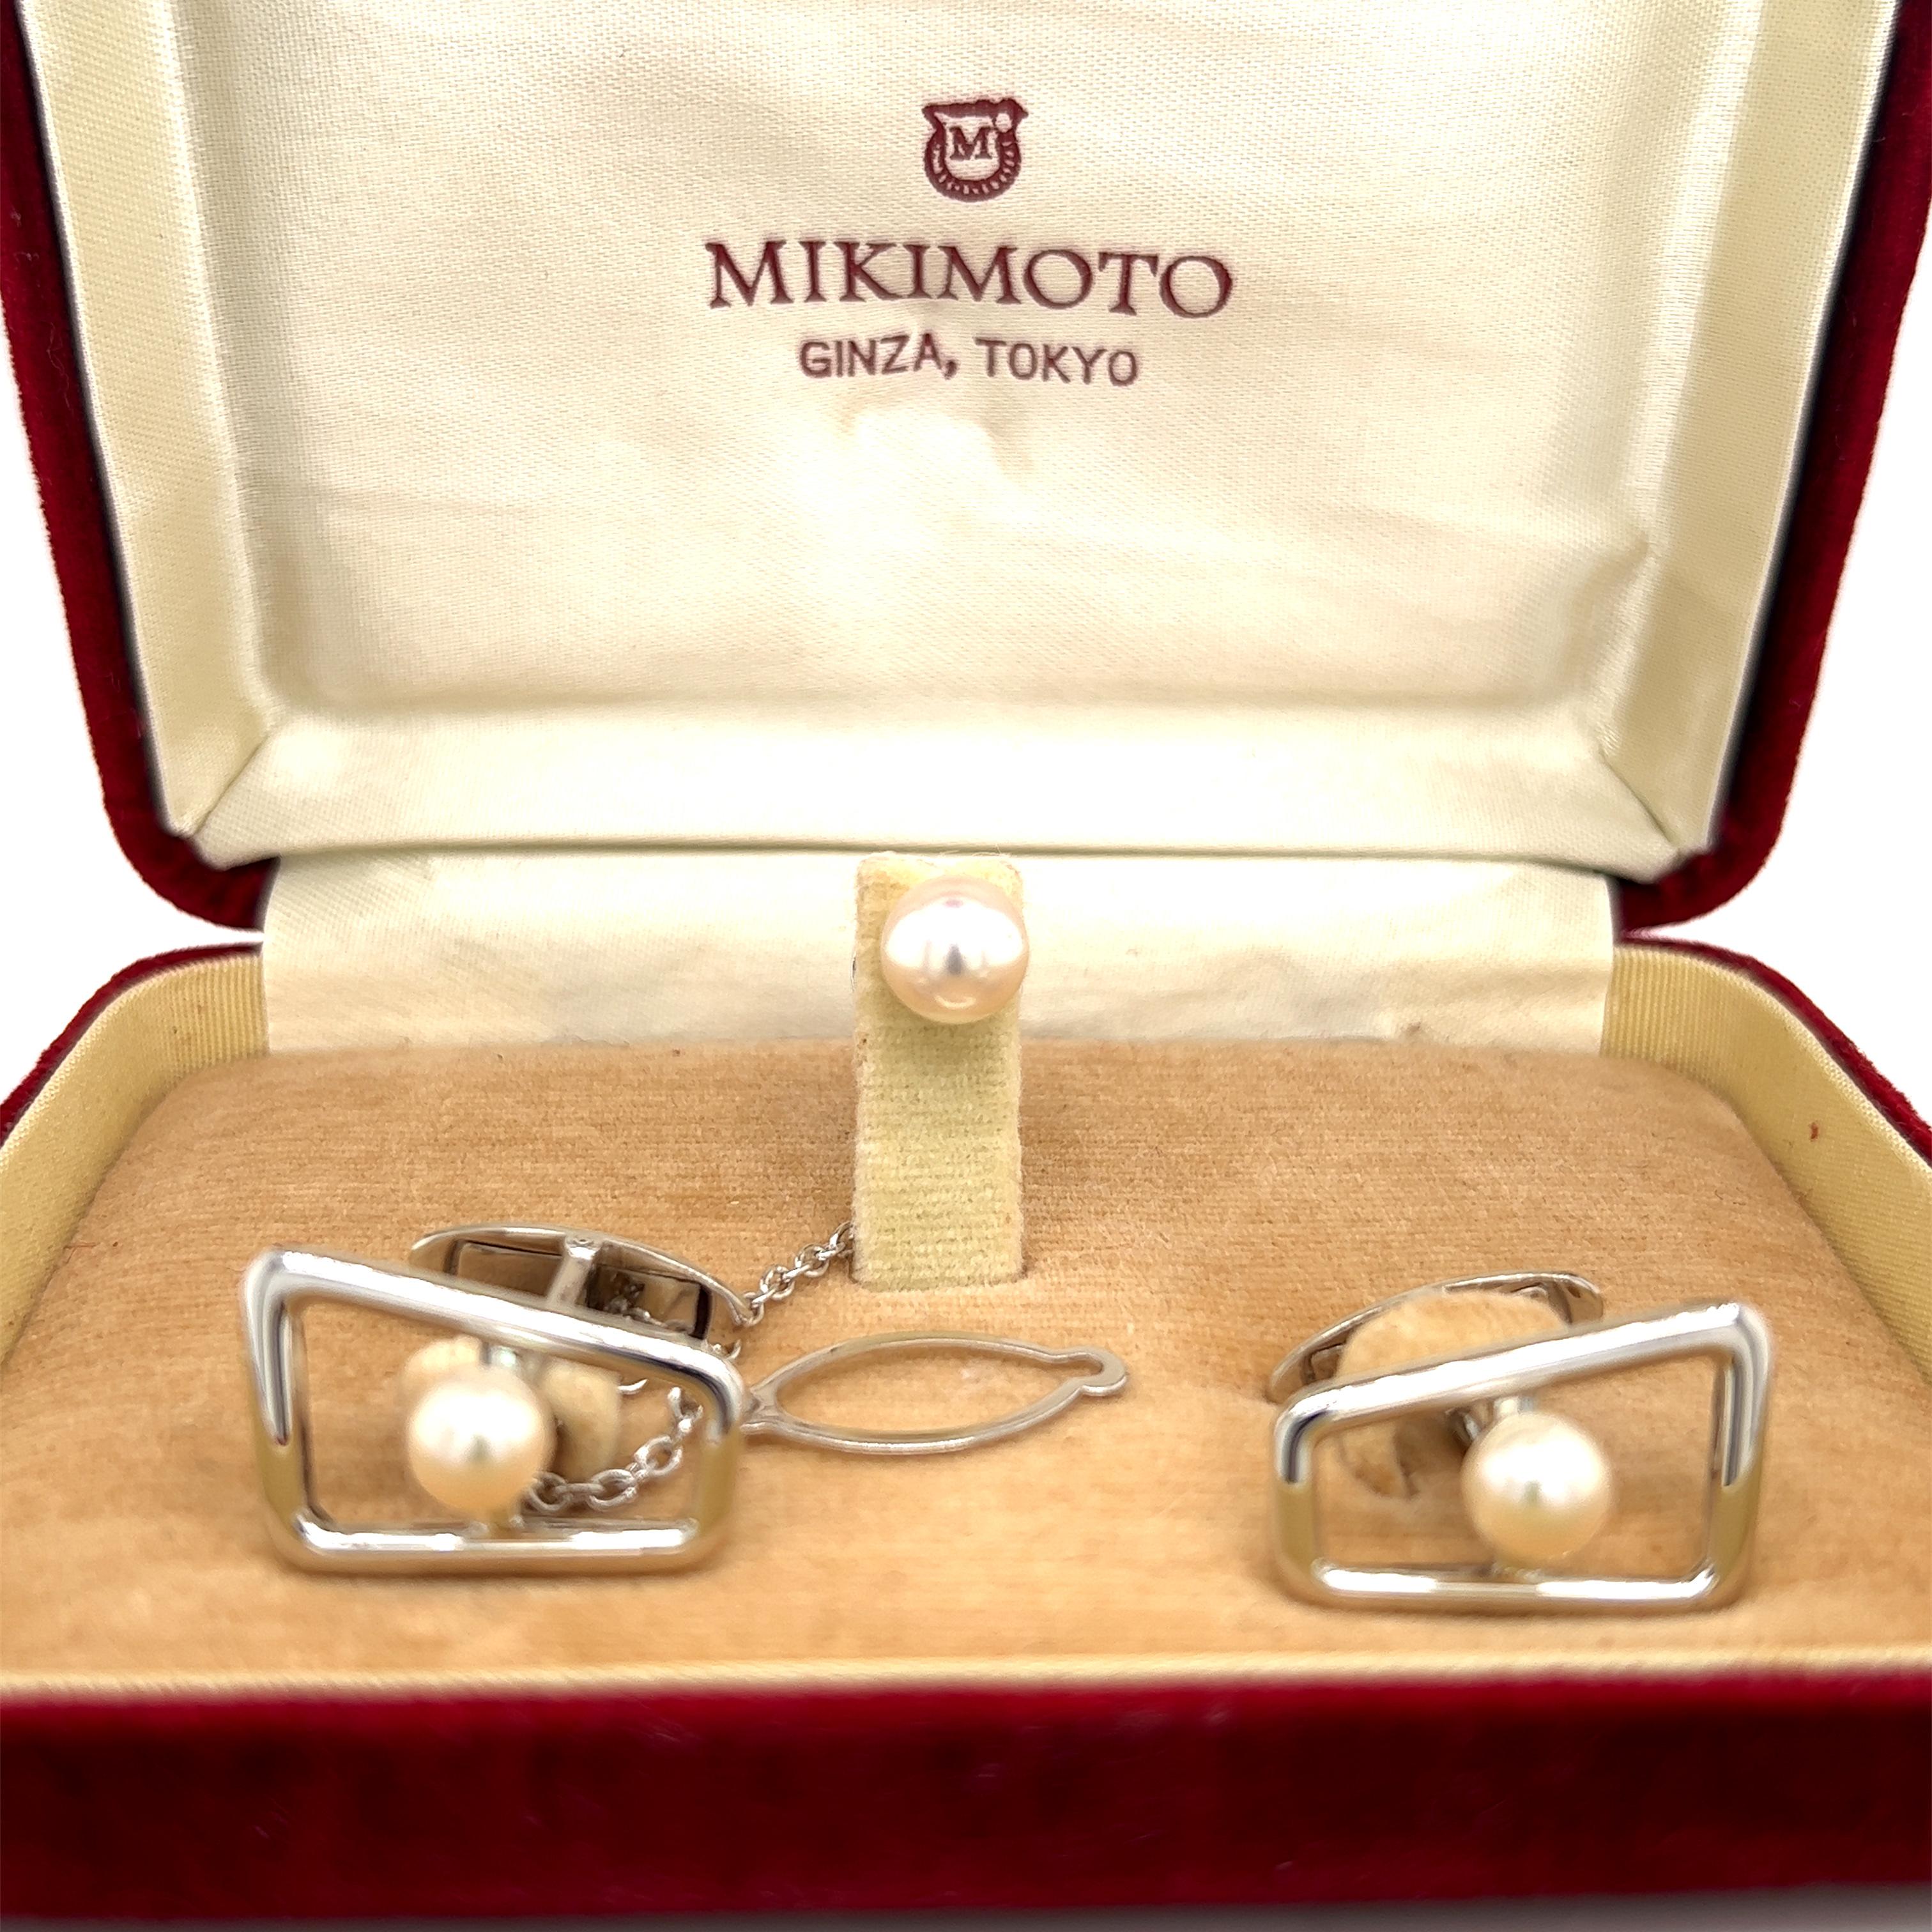 Mikimoto Estate Akoya Pearl Cufflinks and Tie Pin Sterling Silver 7.28 mm M276

These elegant Authentic Mikimoto Estate Akoya pearl cufflinks are made of sterling silver and have 3 Akoya Cultured Pearls.

TRUSTED SELLER SINCE 2002

PLEASE SEE OUR